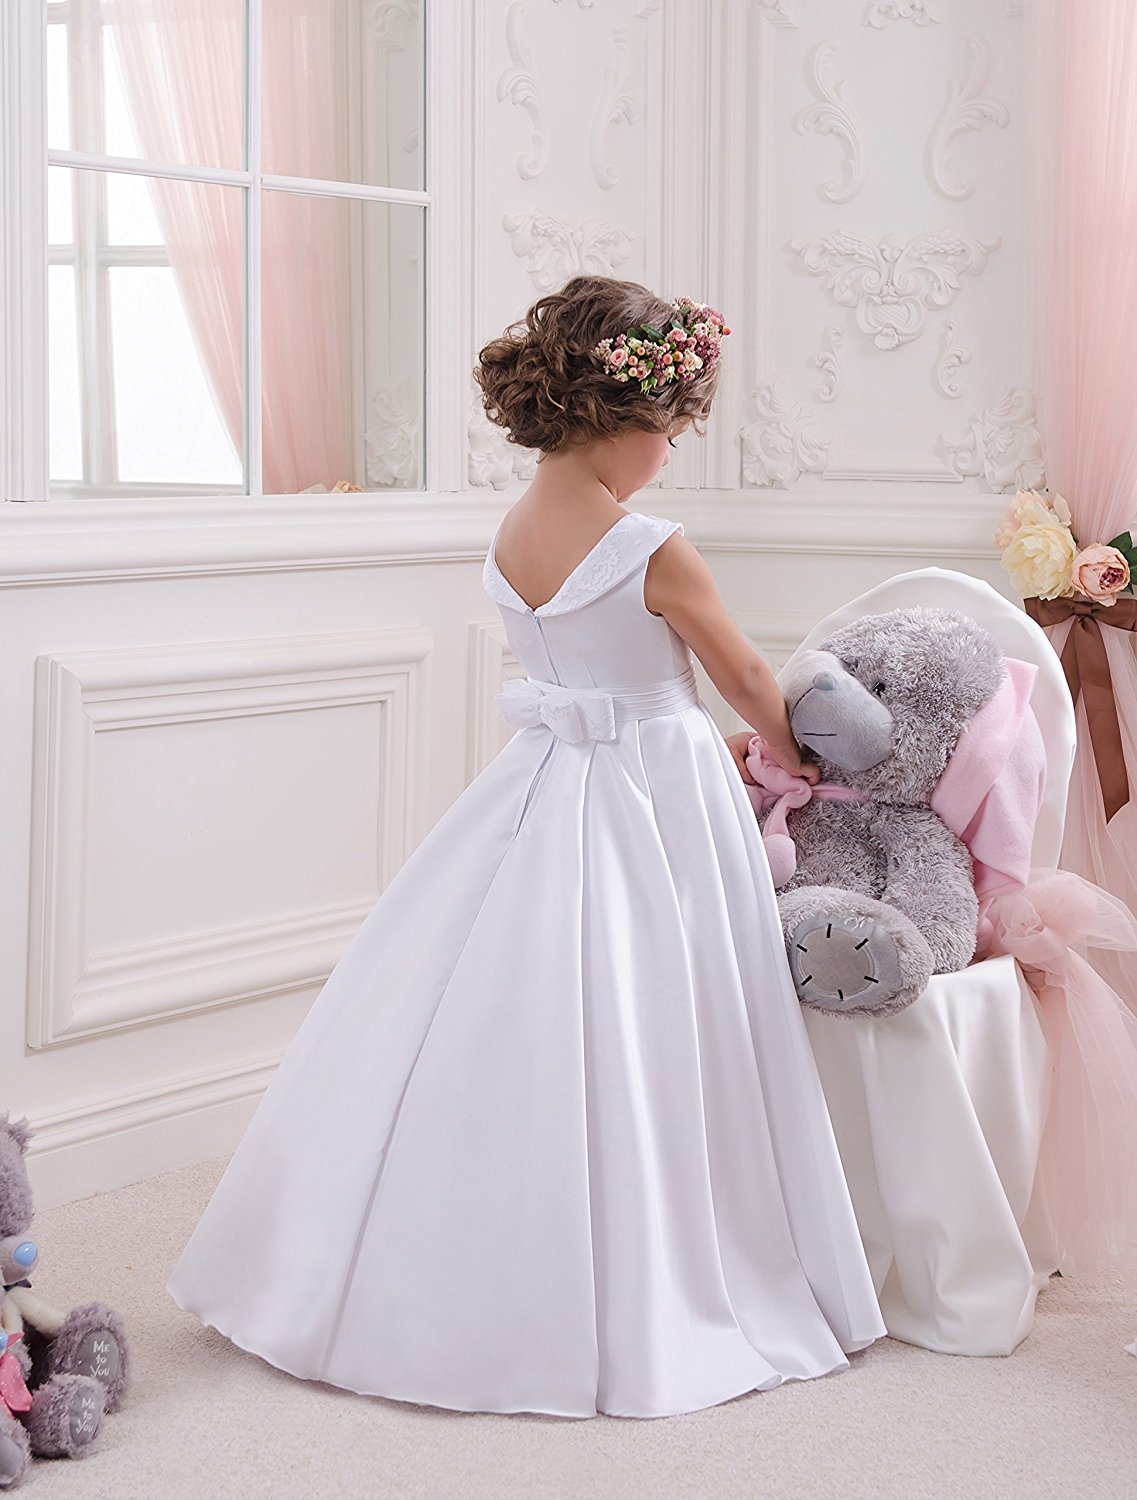 Children's collect beautiful gown | Girls fancy dresses, Wedding dresses  for kids, Frocks for girls